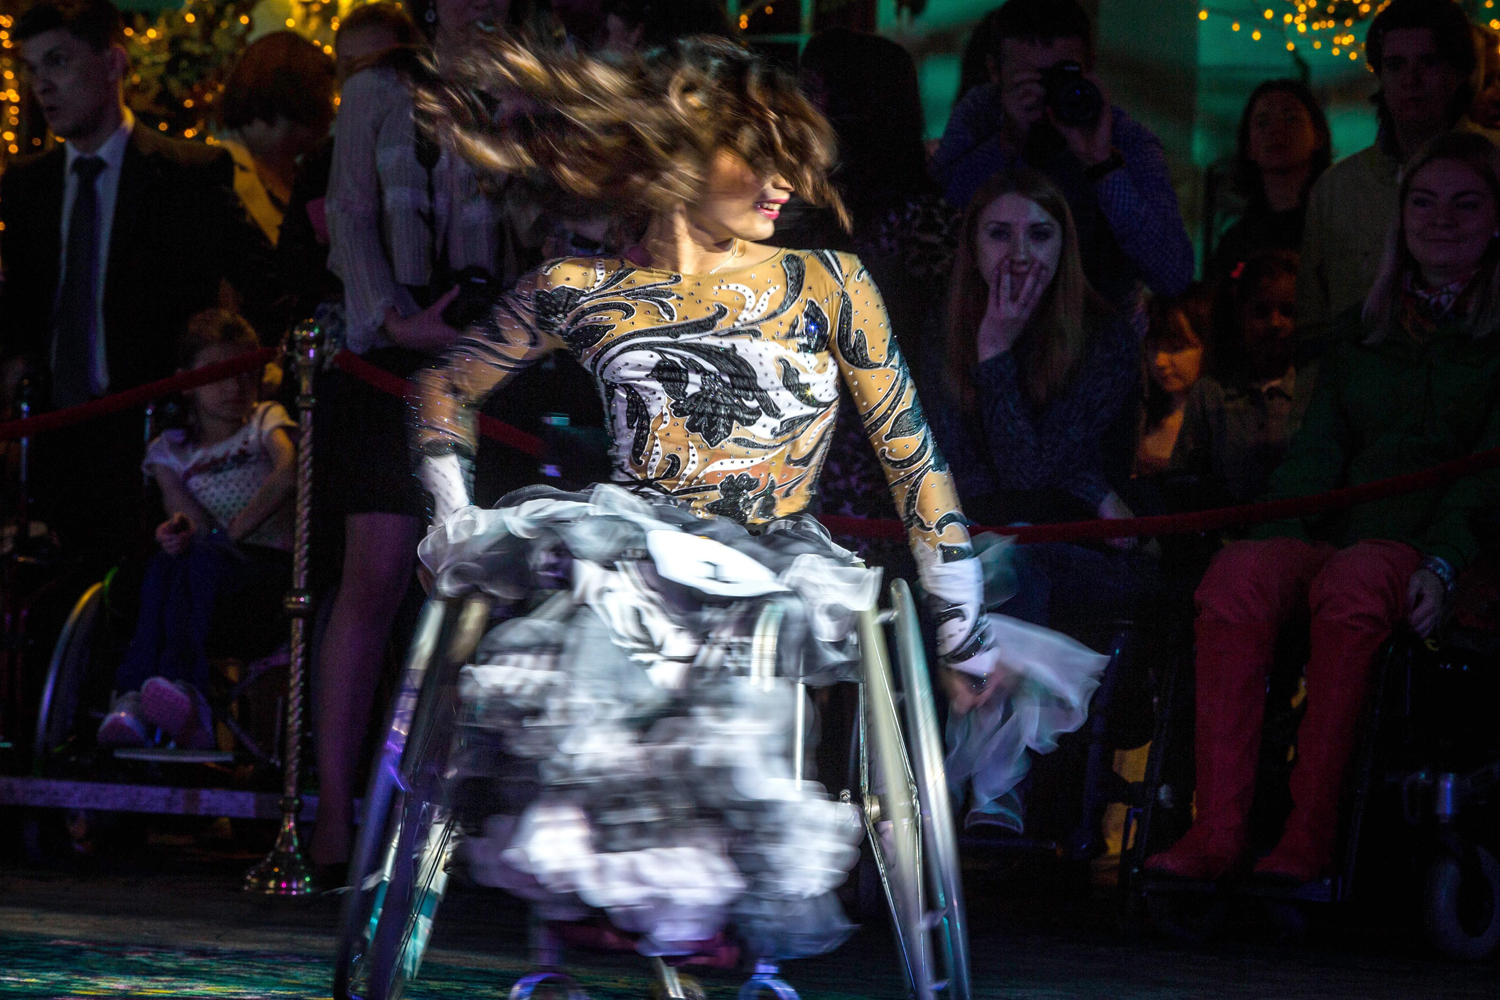 The beauty contest for disabled people 'Miss Independence 2013’